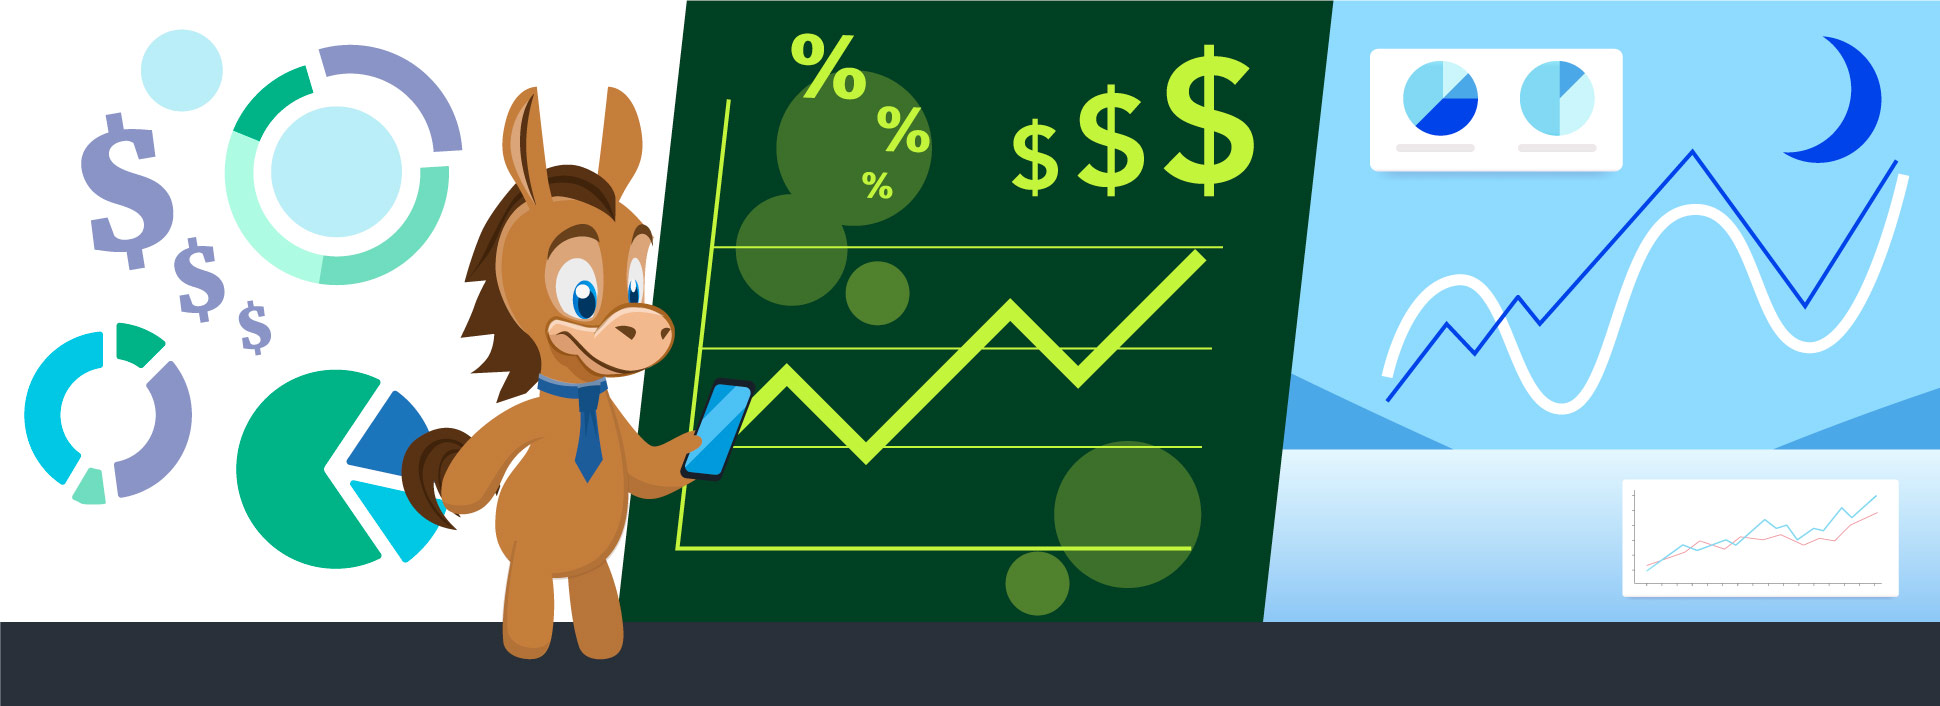 A cartoon character of a donkey wearing a tie and presenting a financial chart, alongside various symbols like currency signs and percentages, suggesting a playful take on economic or investment concepts.